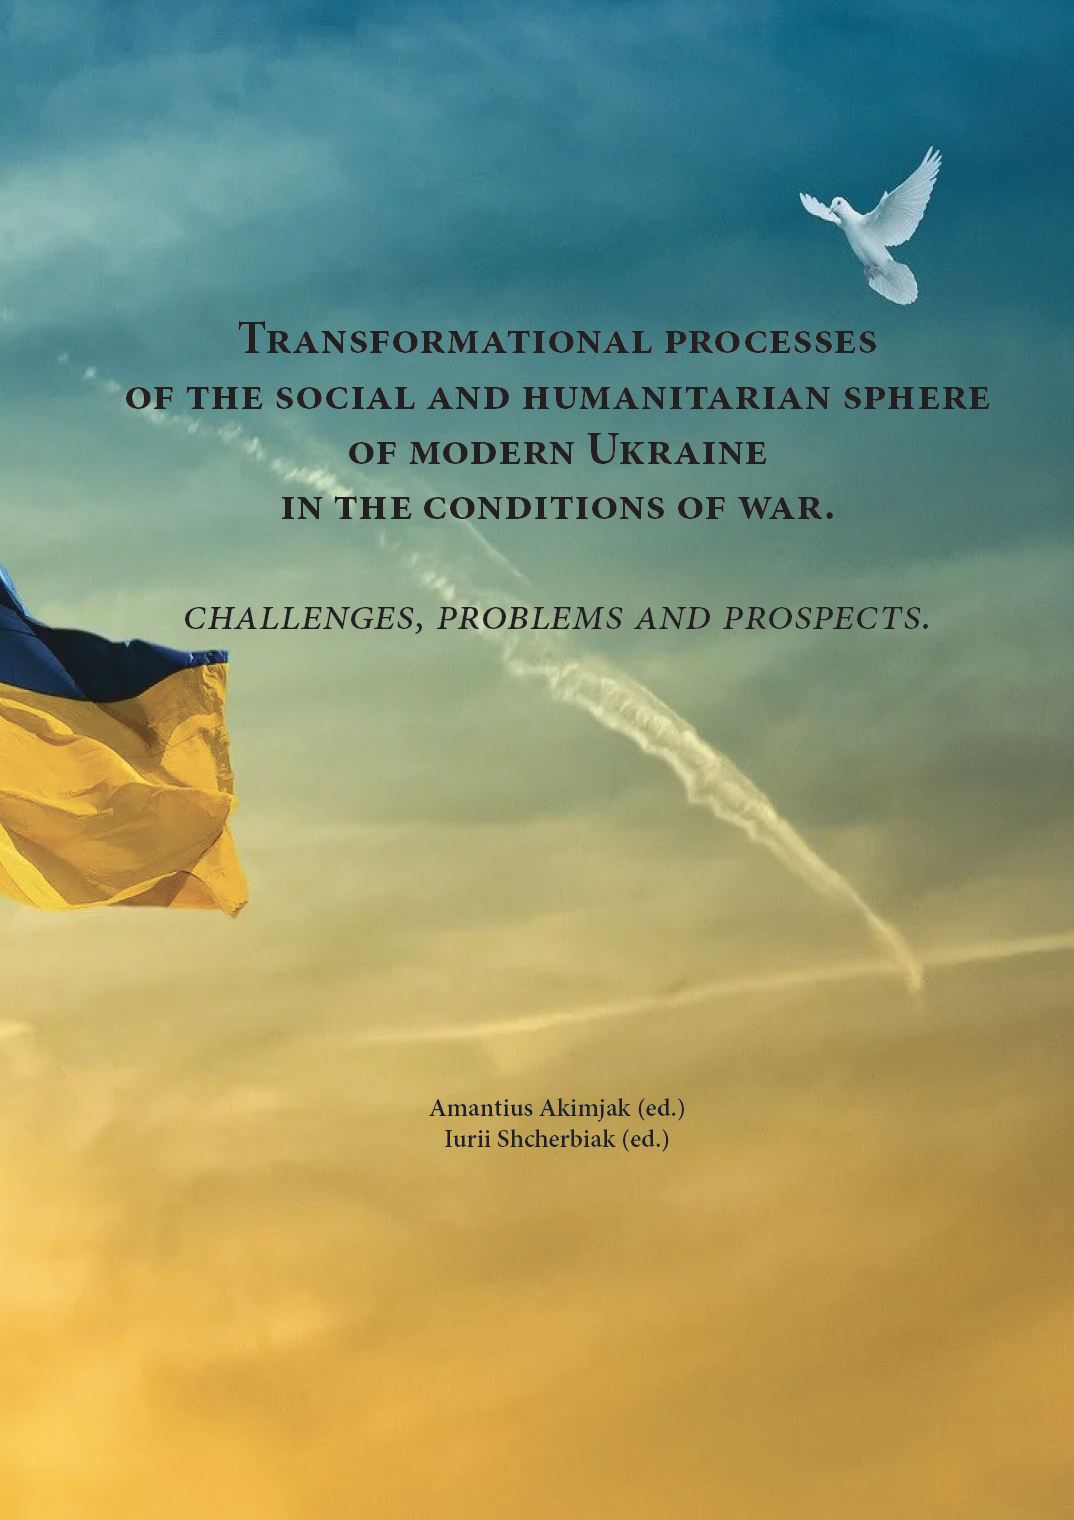 Transformational processes of the social and humanitarian sphere of modern Ukraine in the conditions of war.